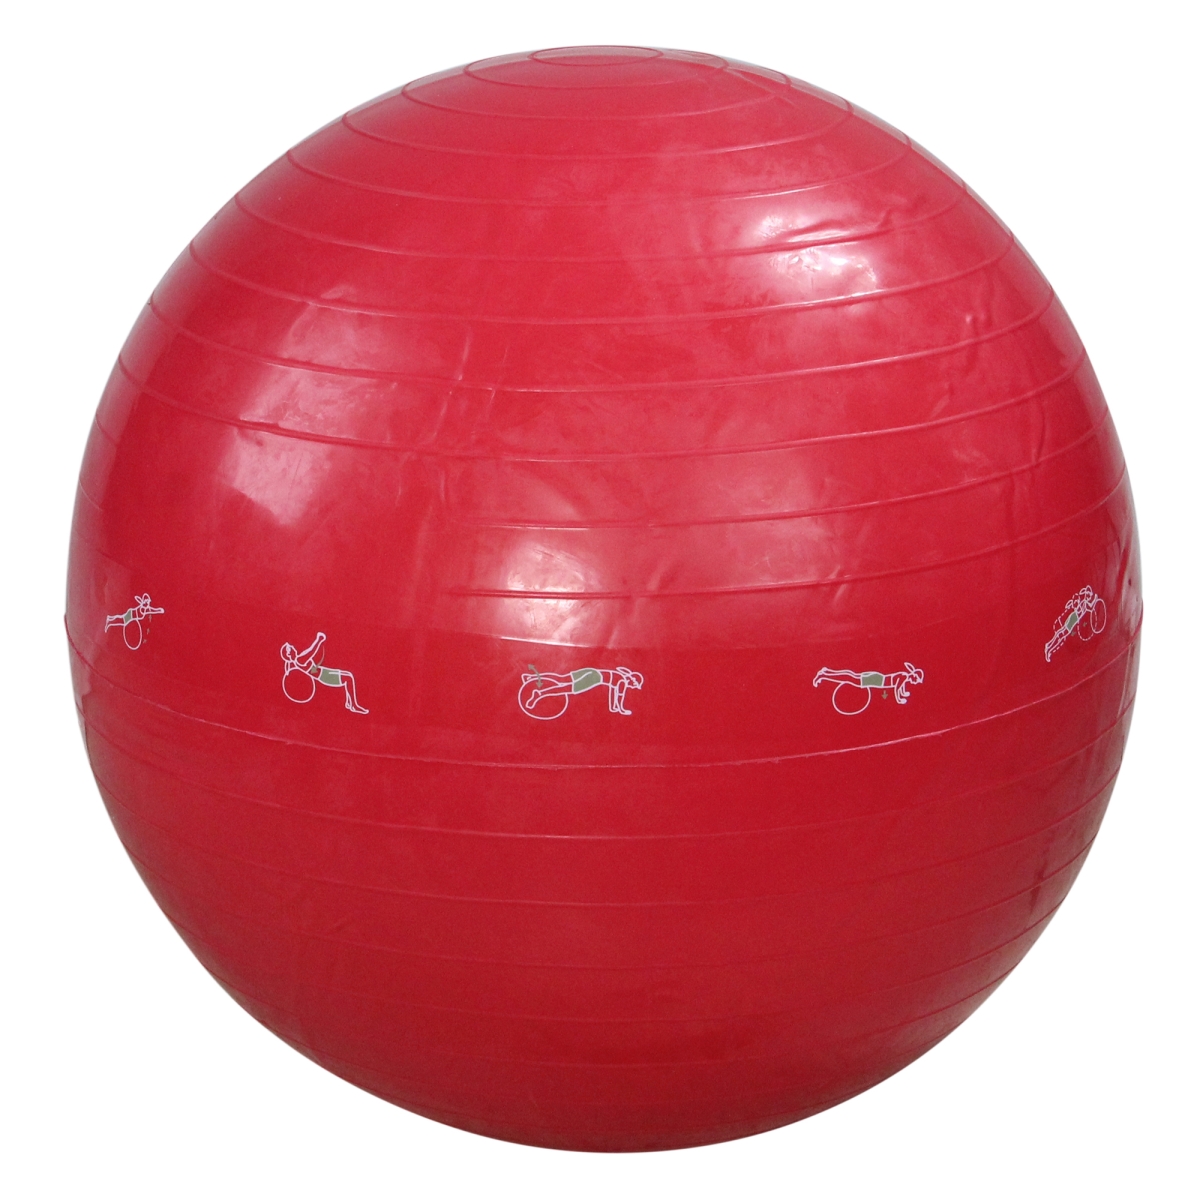 Picture of Avon 33537539 24 in. Exercise Gym Ball - Red